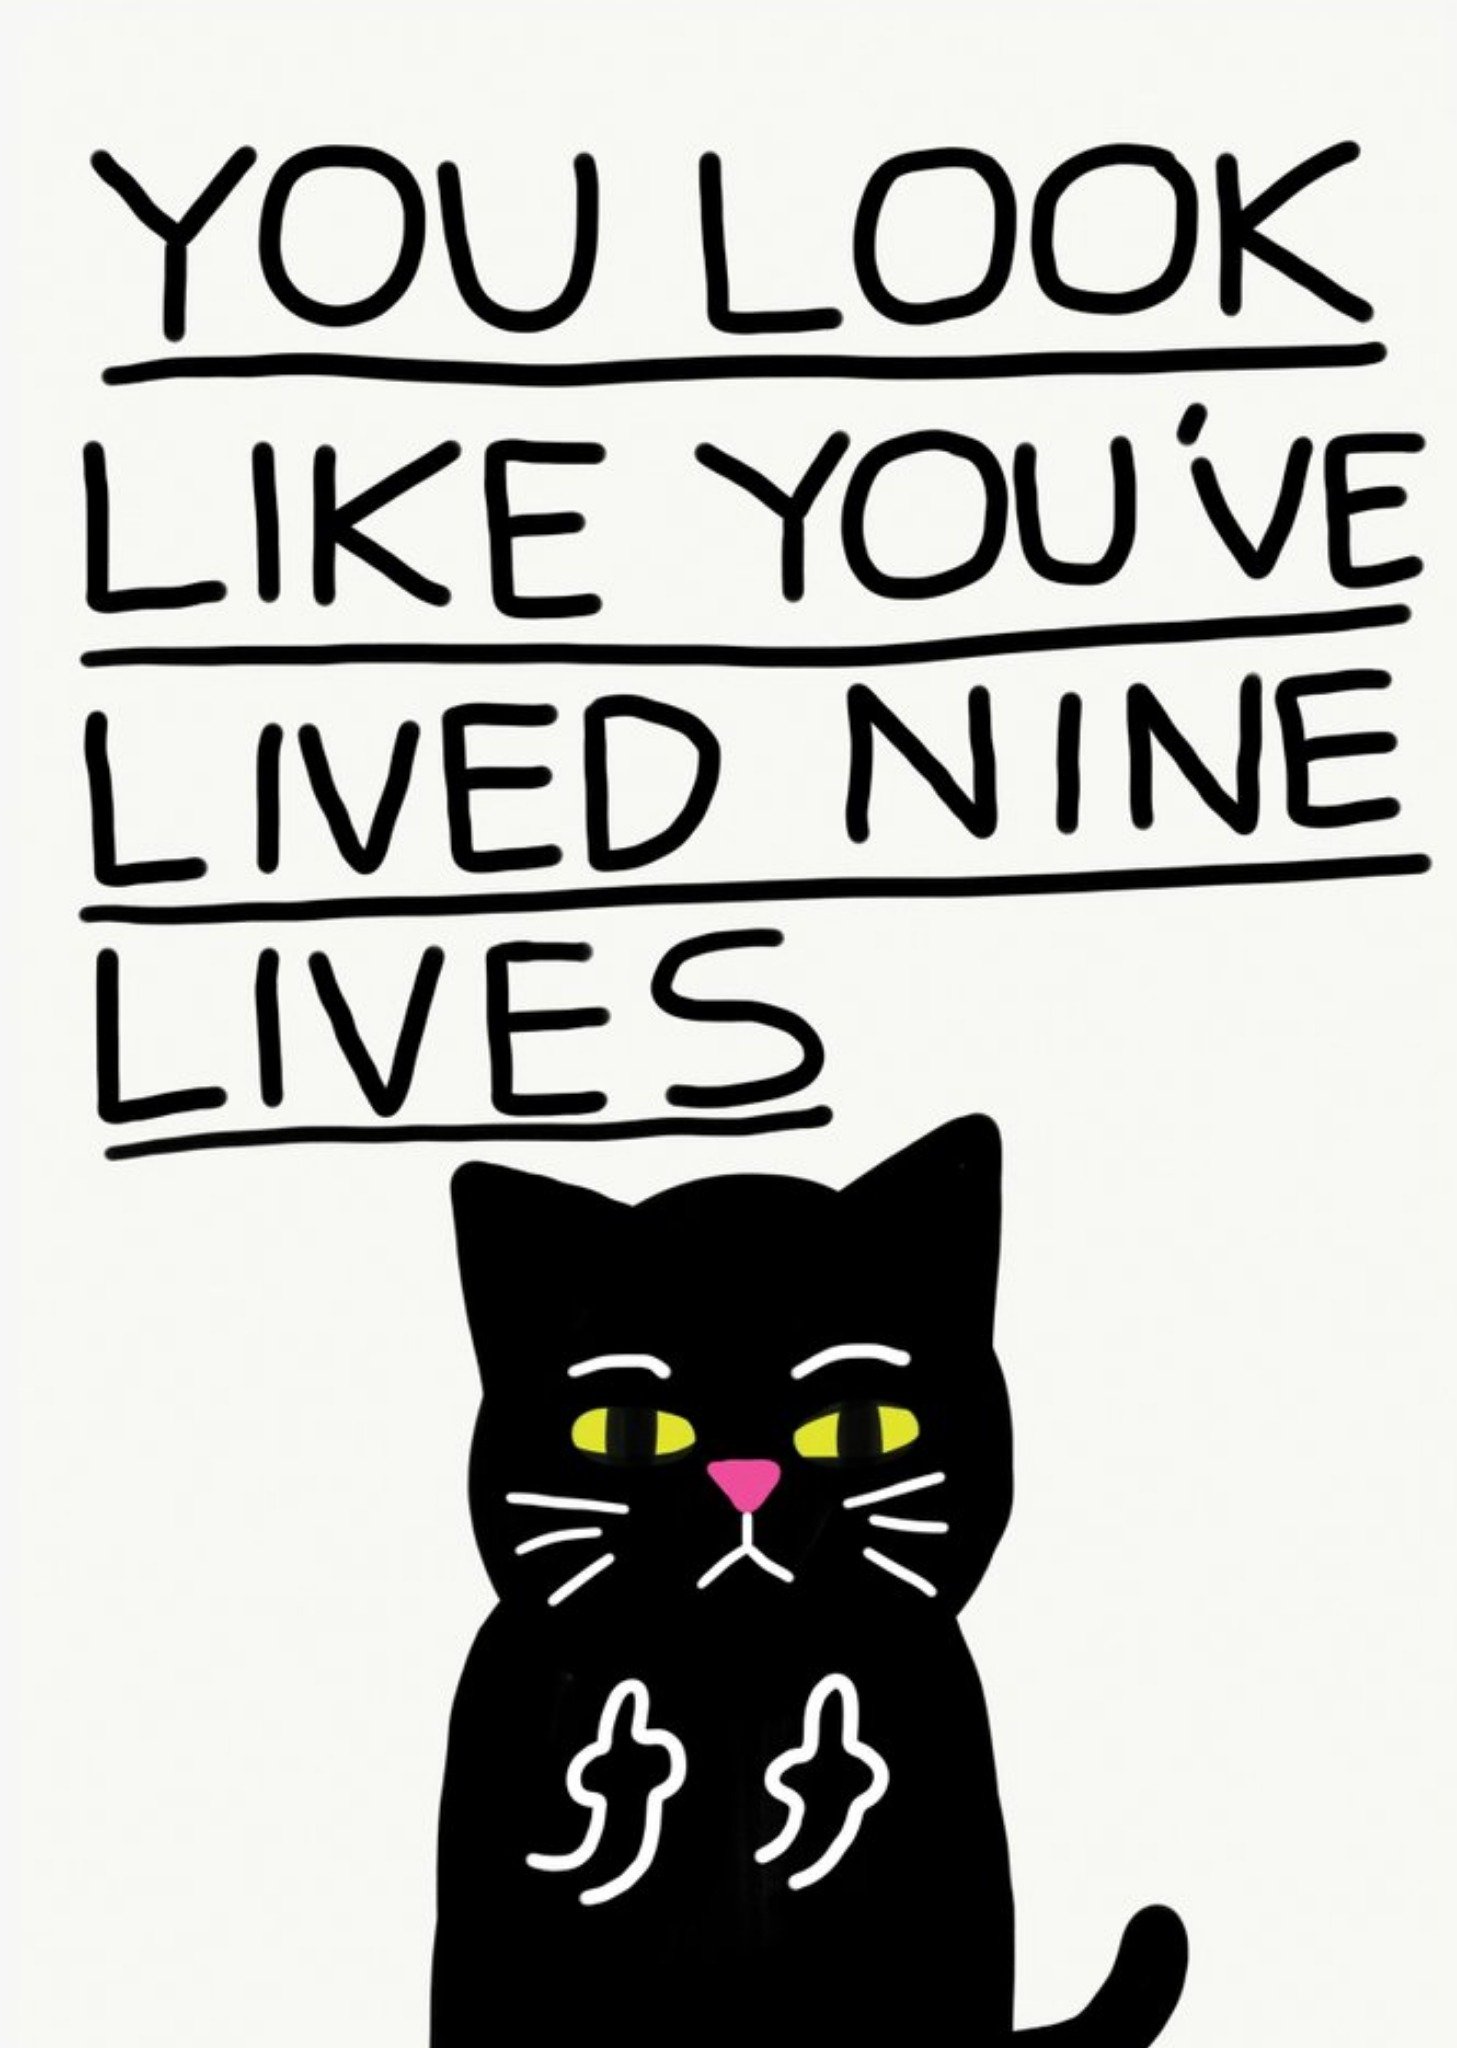 Jolly Awesome You Look Like You've Lived 9 Nine Lives Black Cat Swearing Card Ecard